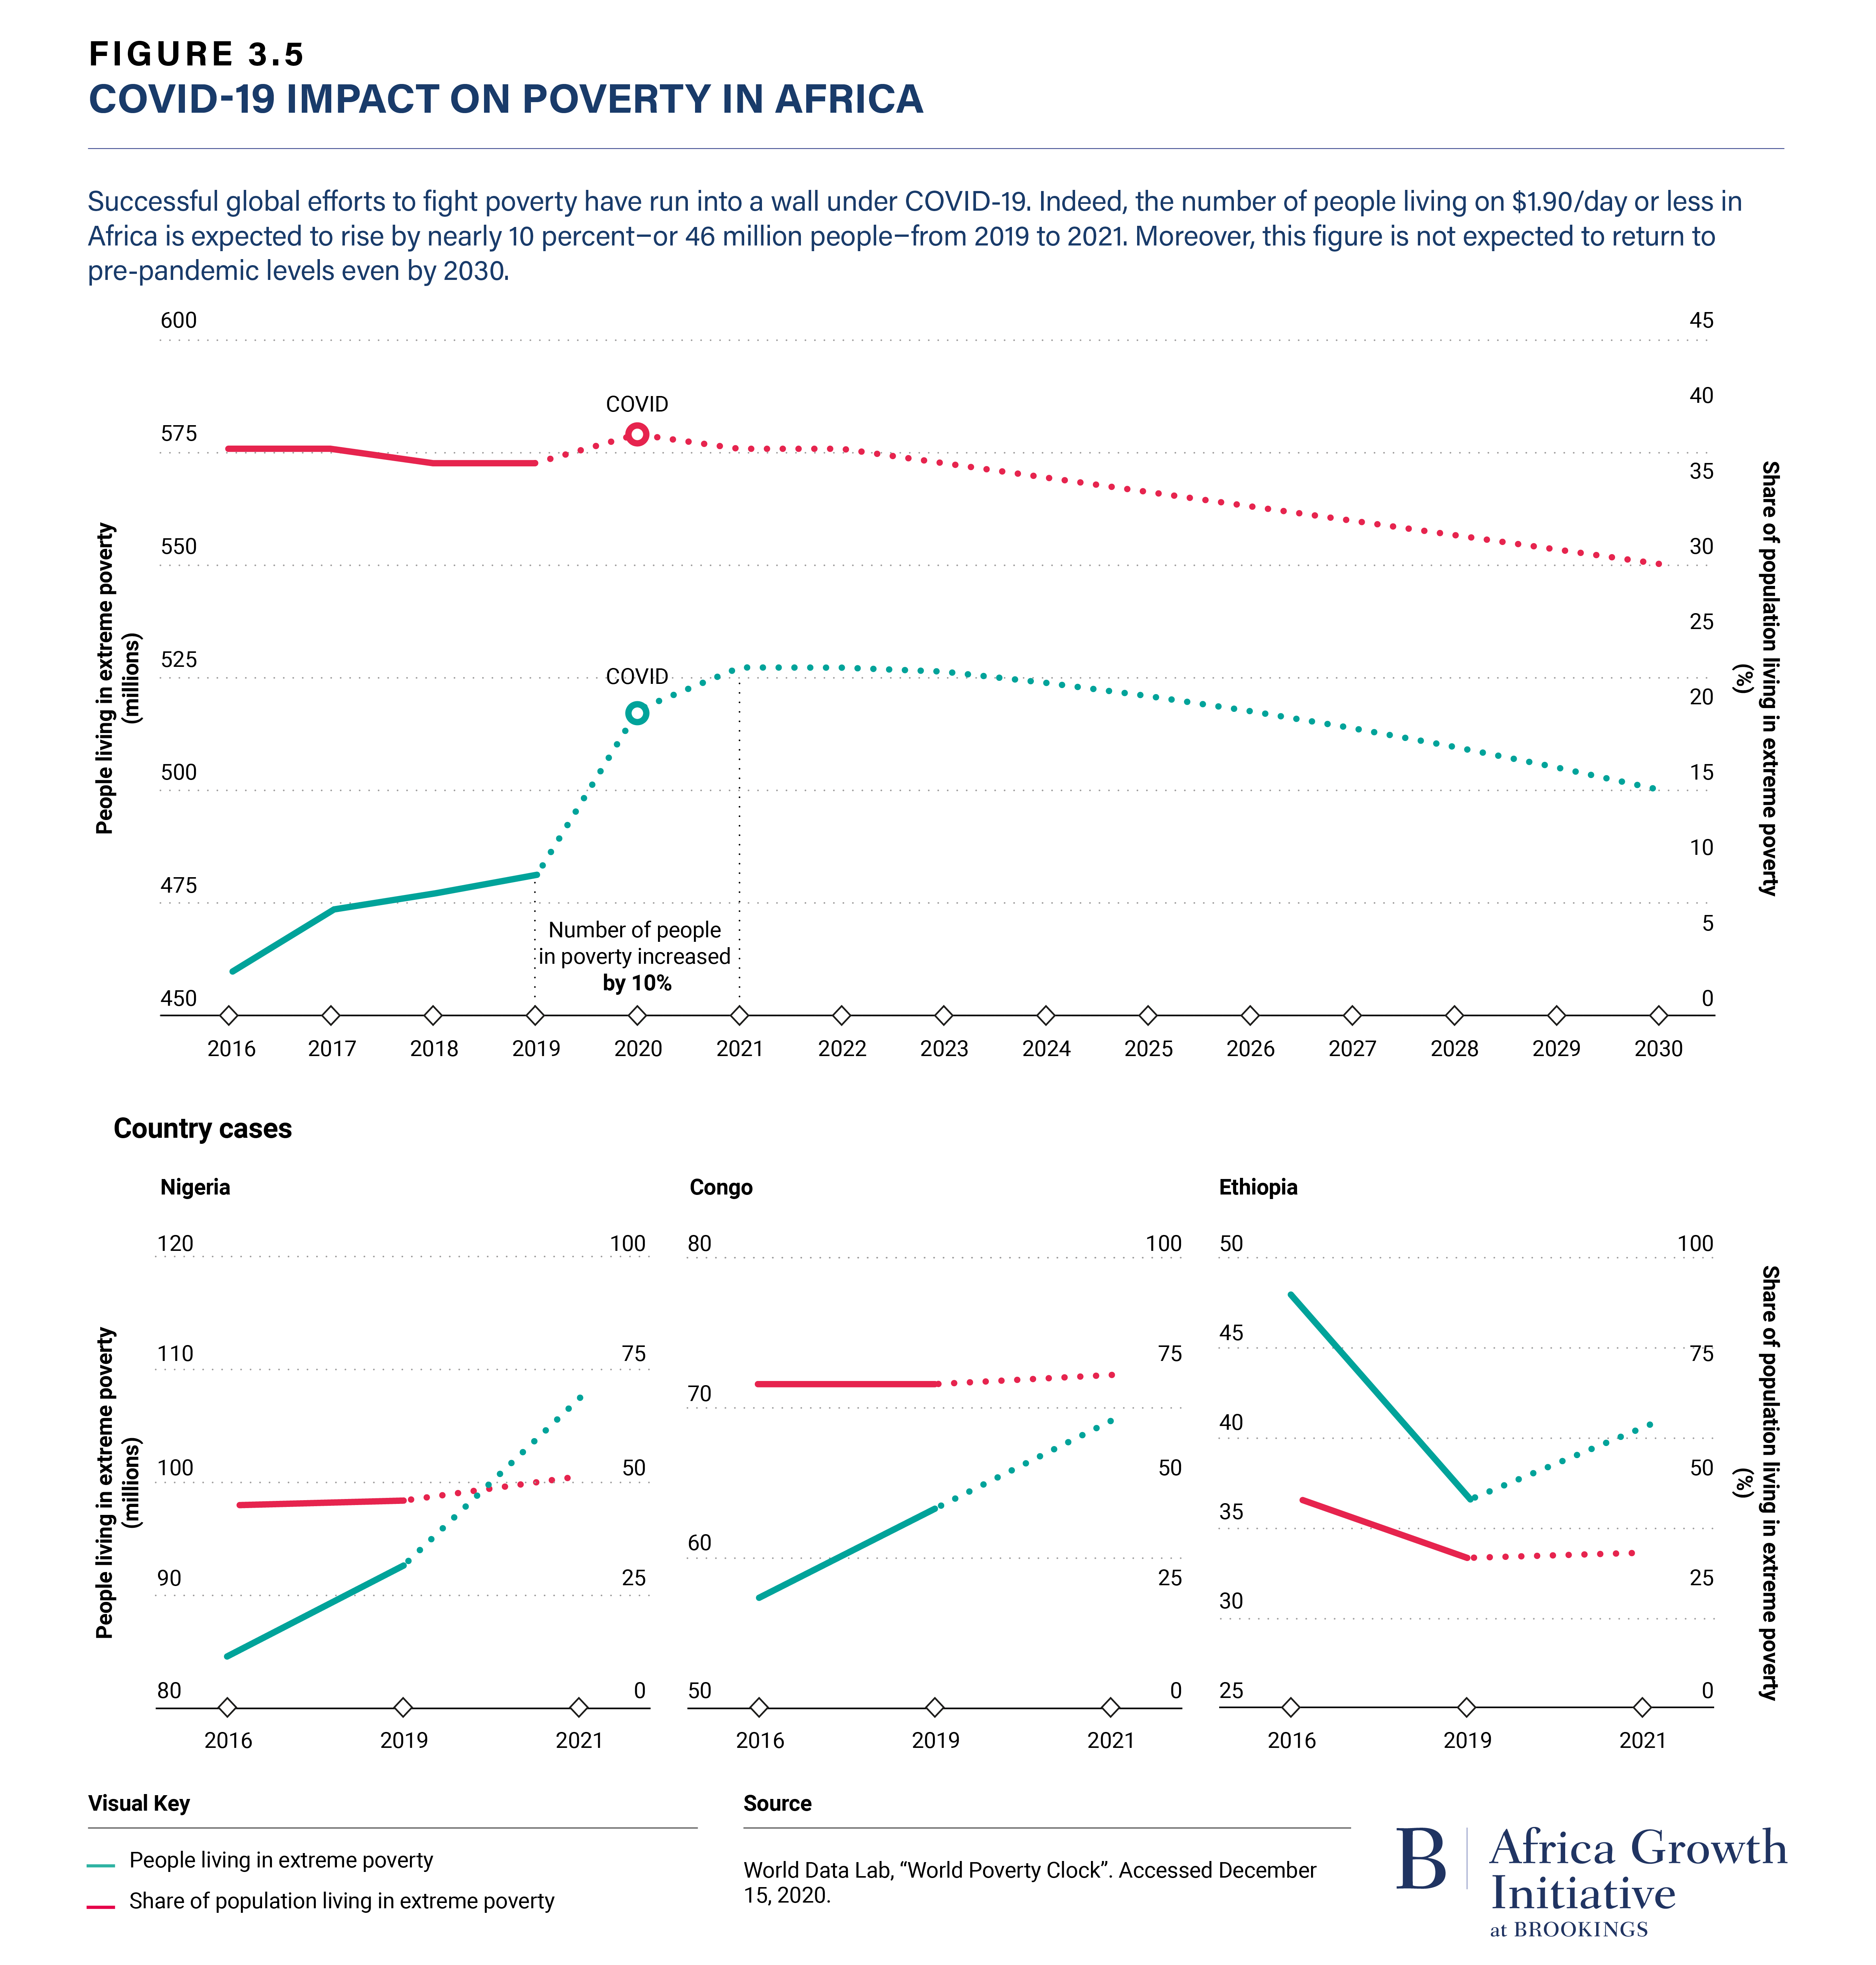 Figure 3.5 COVID-19 Impact on Poverty in Africa